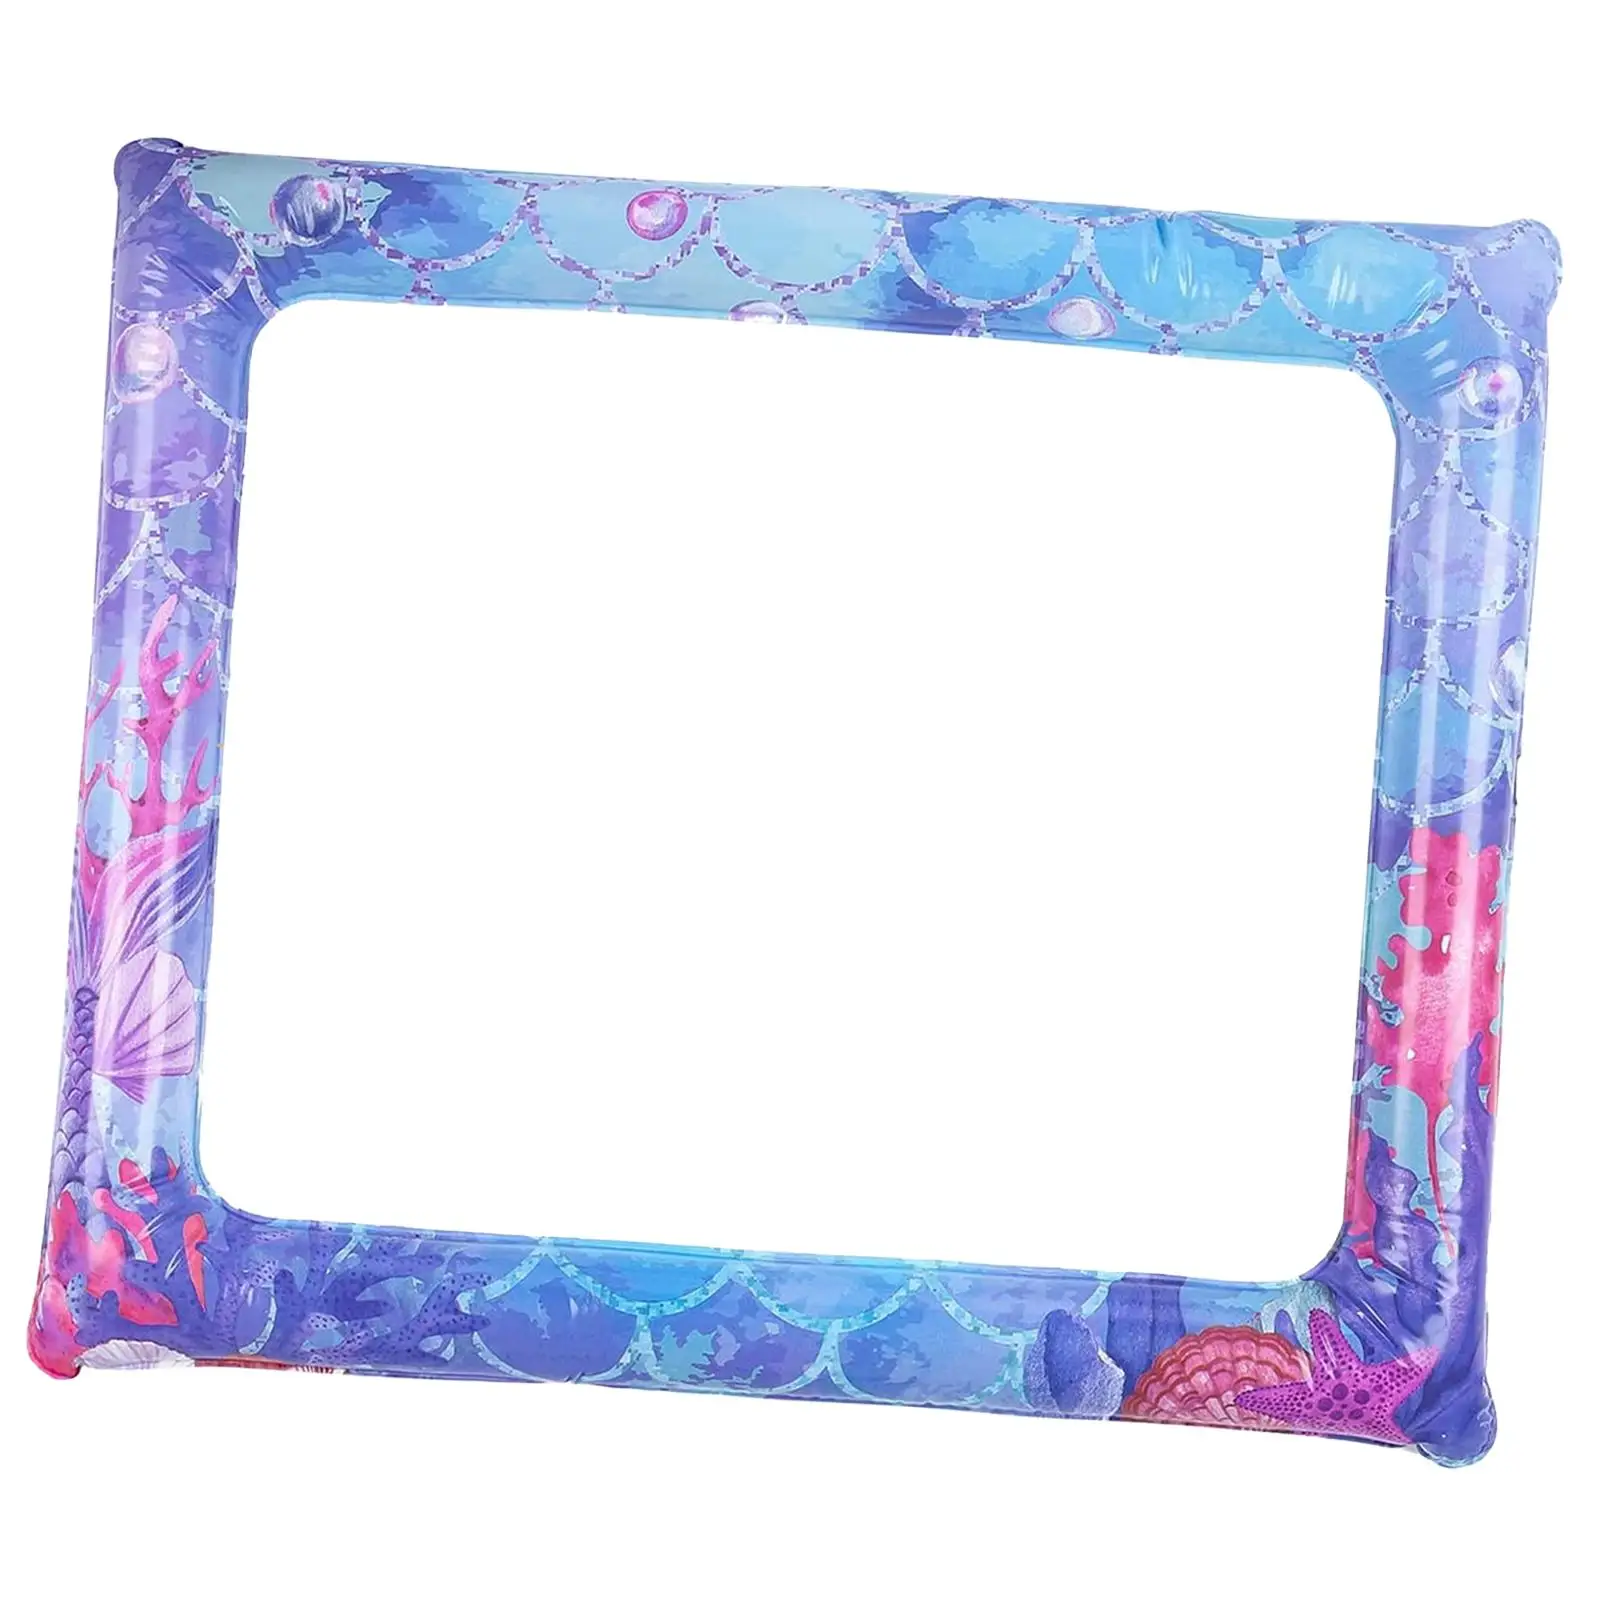 Inflatable Photo Frame Mermaid Themed Large Portable Summer Party Decoration Party Favor Supplies Selfie Photo Frame Photo Prop